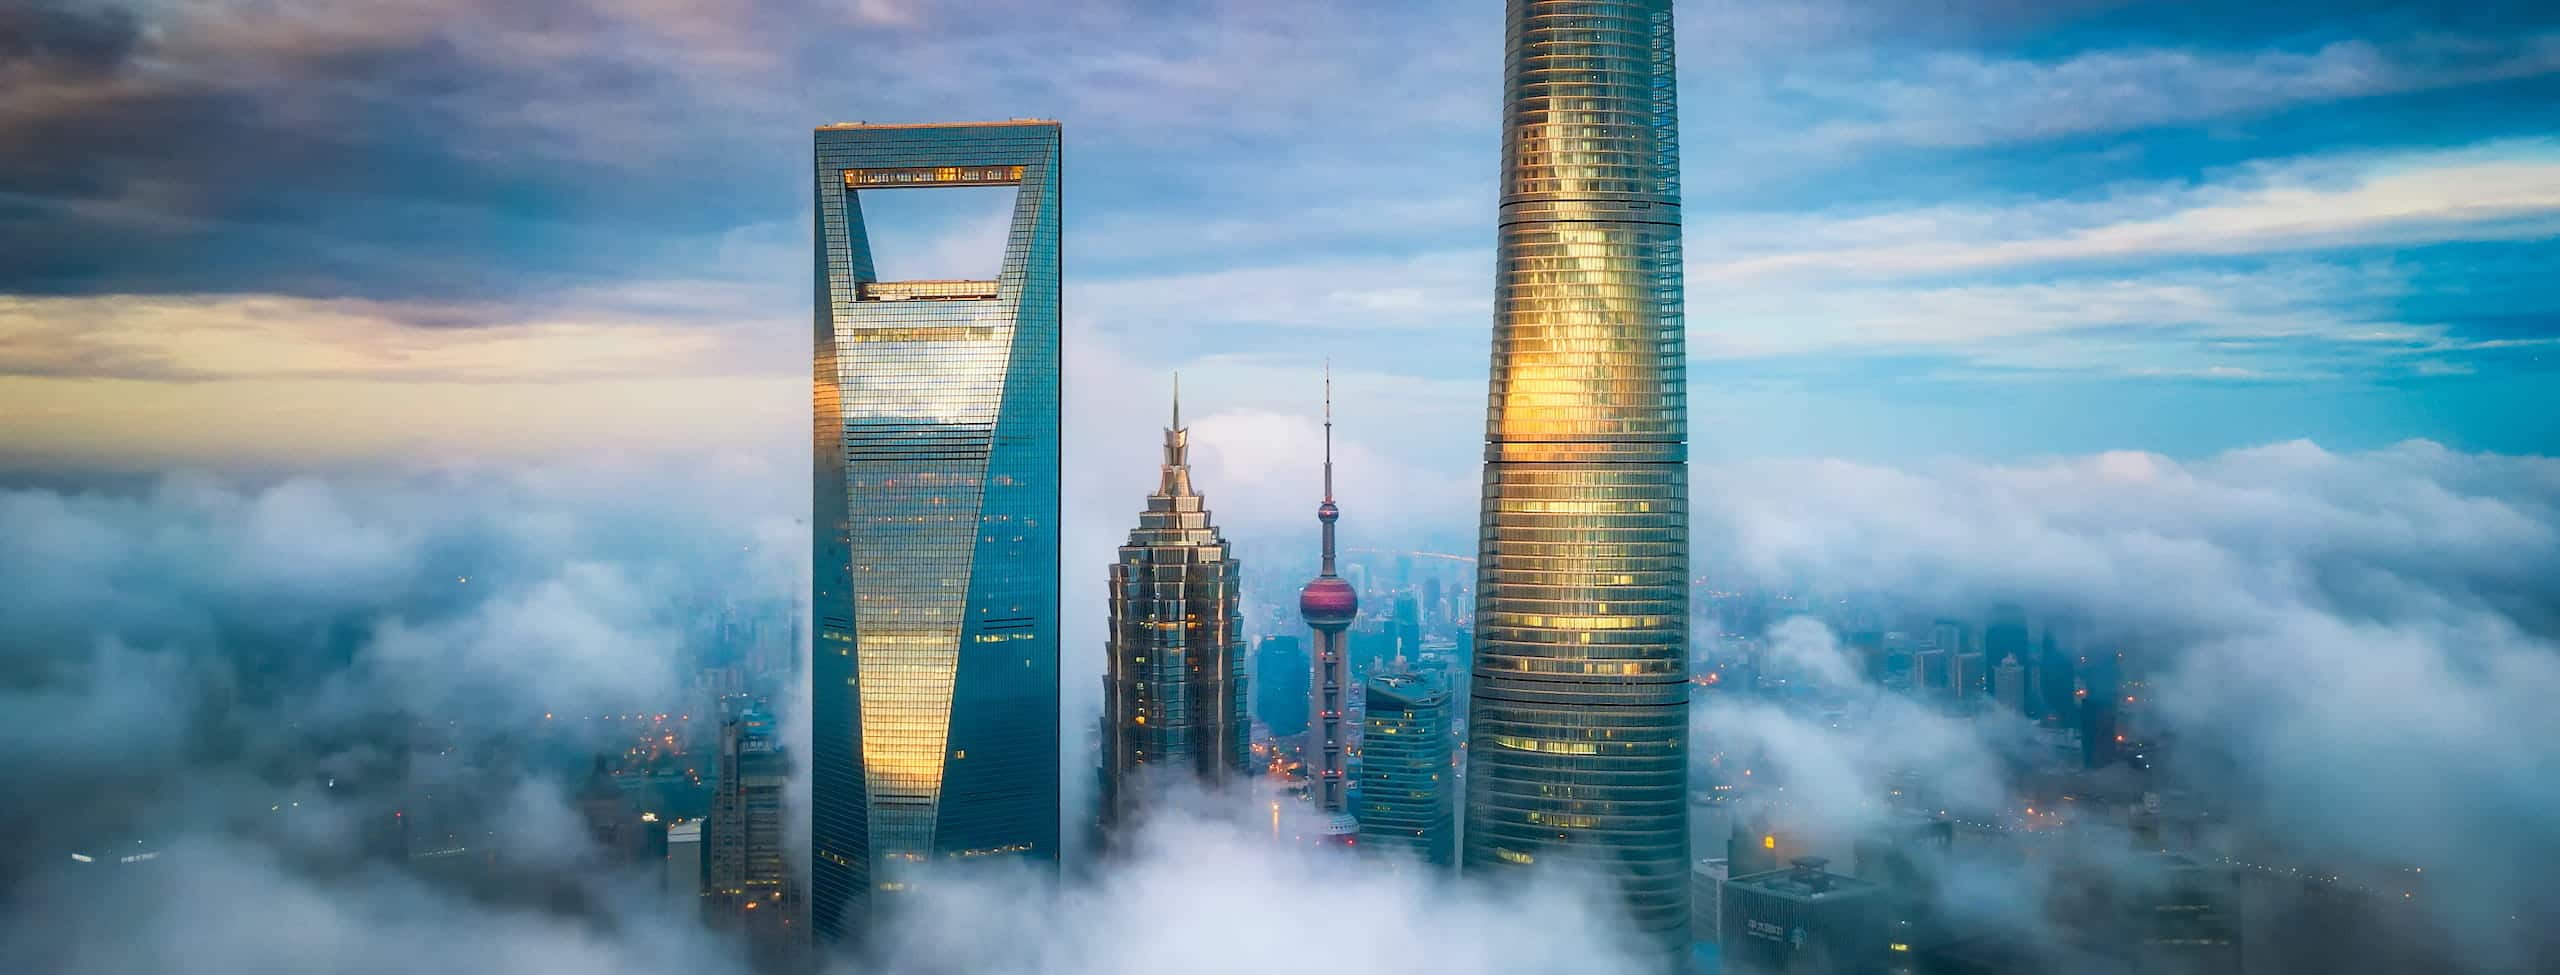 Skyscrapers surrounded by clouds